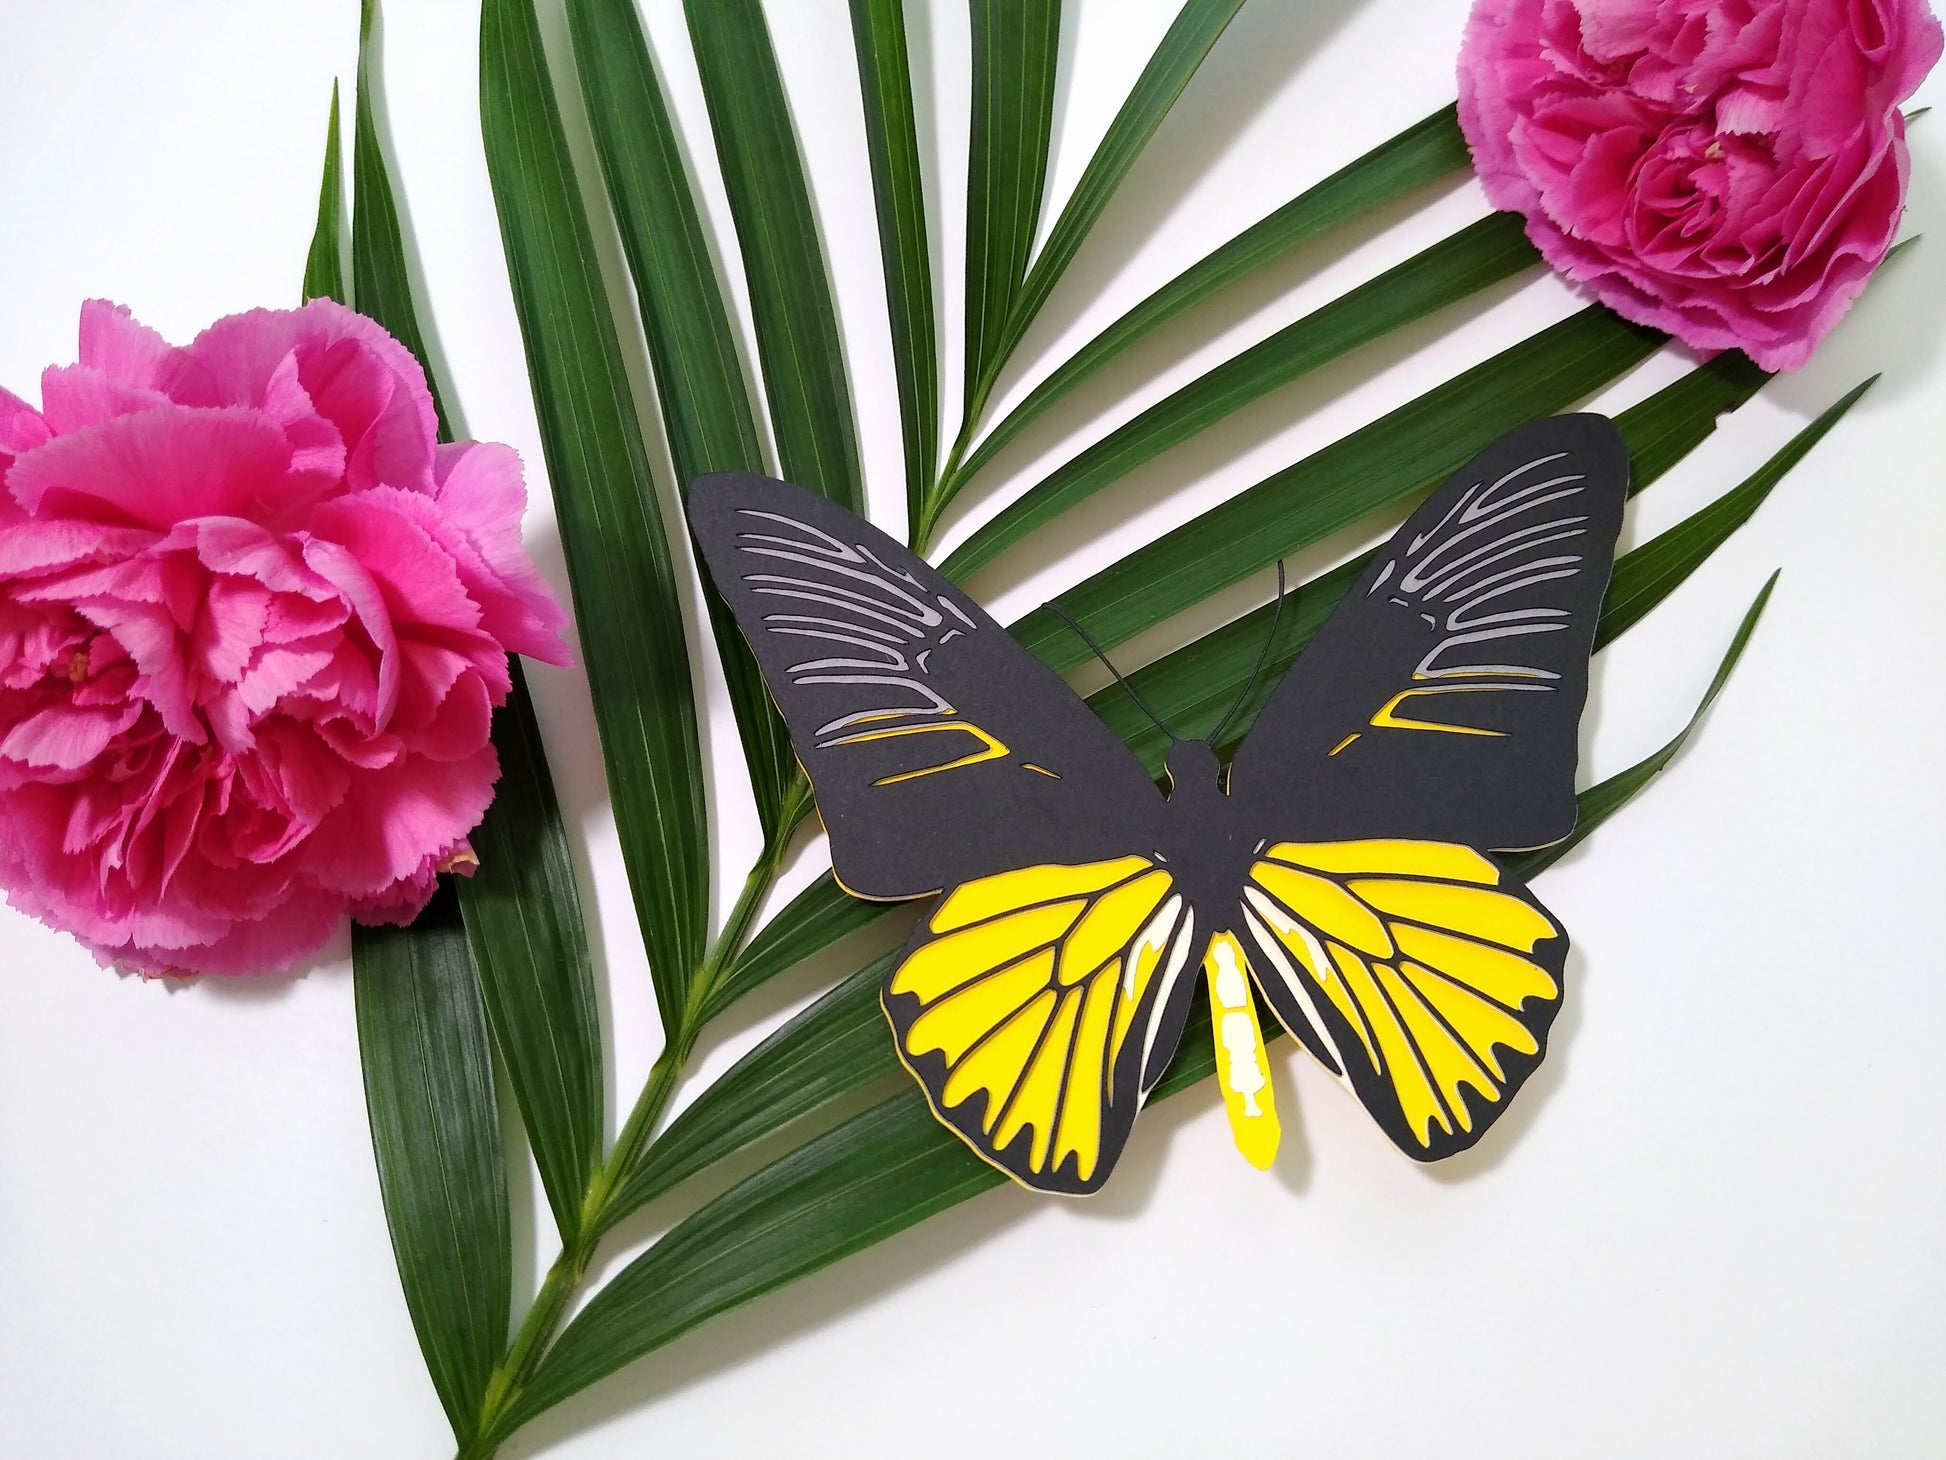 Multi-layered paper butterfly, in the design of a male Magellan Birdwing butterfly. It rests on a large sprig of leaves and beside two pink flowers.